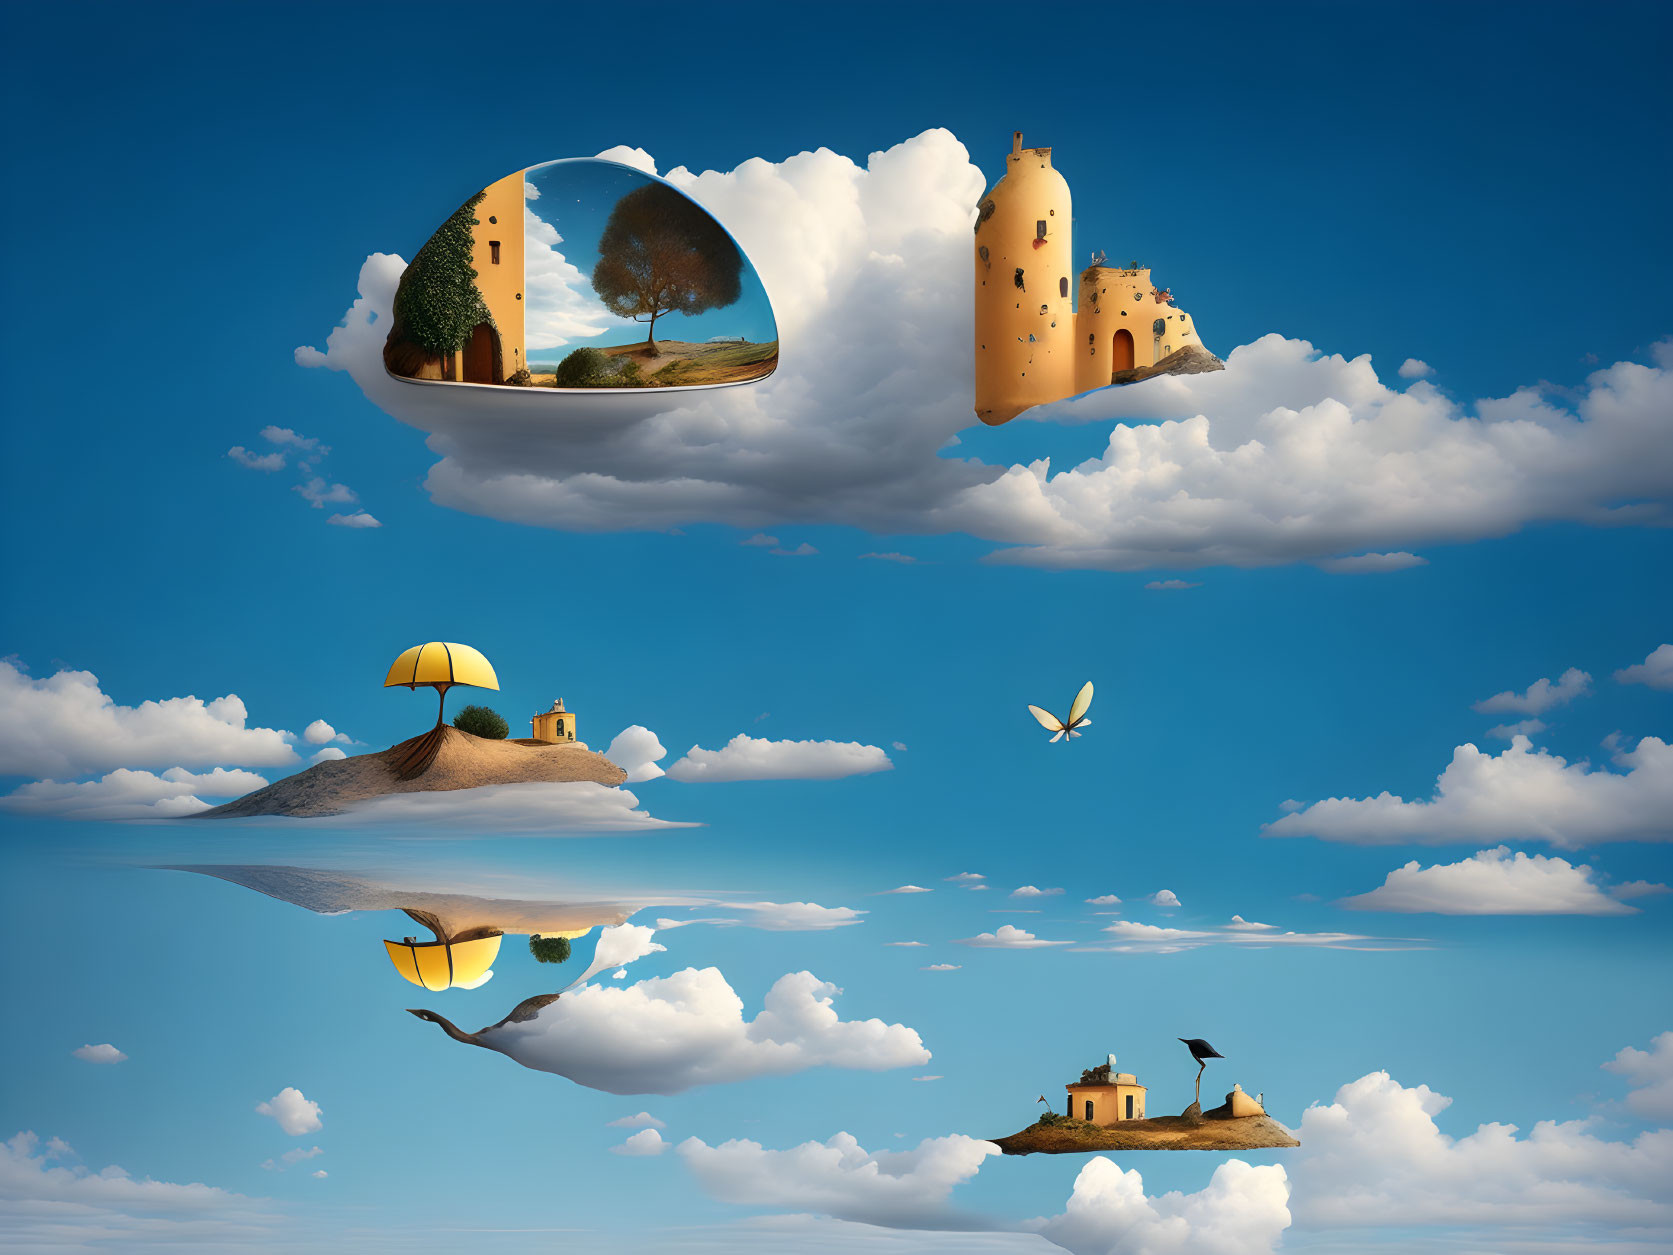 Surrealistic house and tower on floating clouds with mirrored landscape and butterfly.